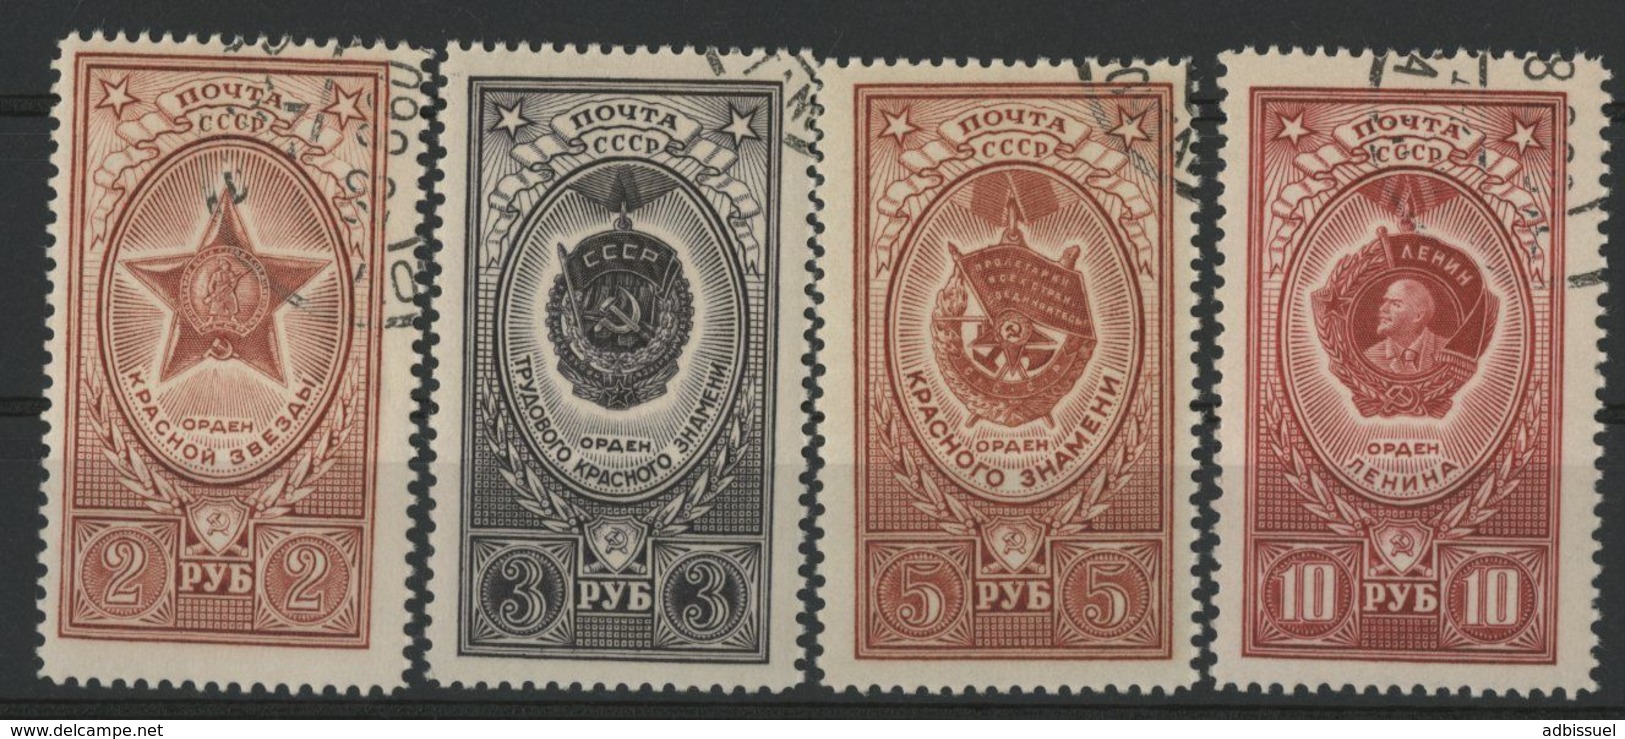 RUSSIE - RUSSIA N° 1638 à 1641 COTE 14,50 €.TB - Used Stamps